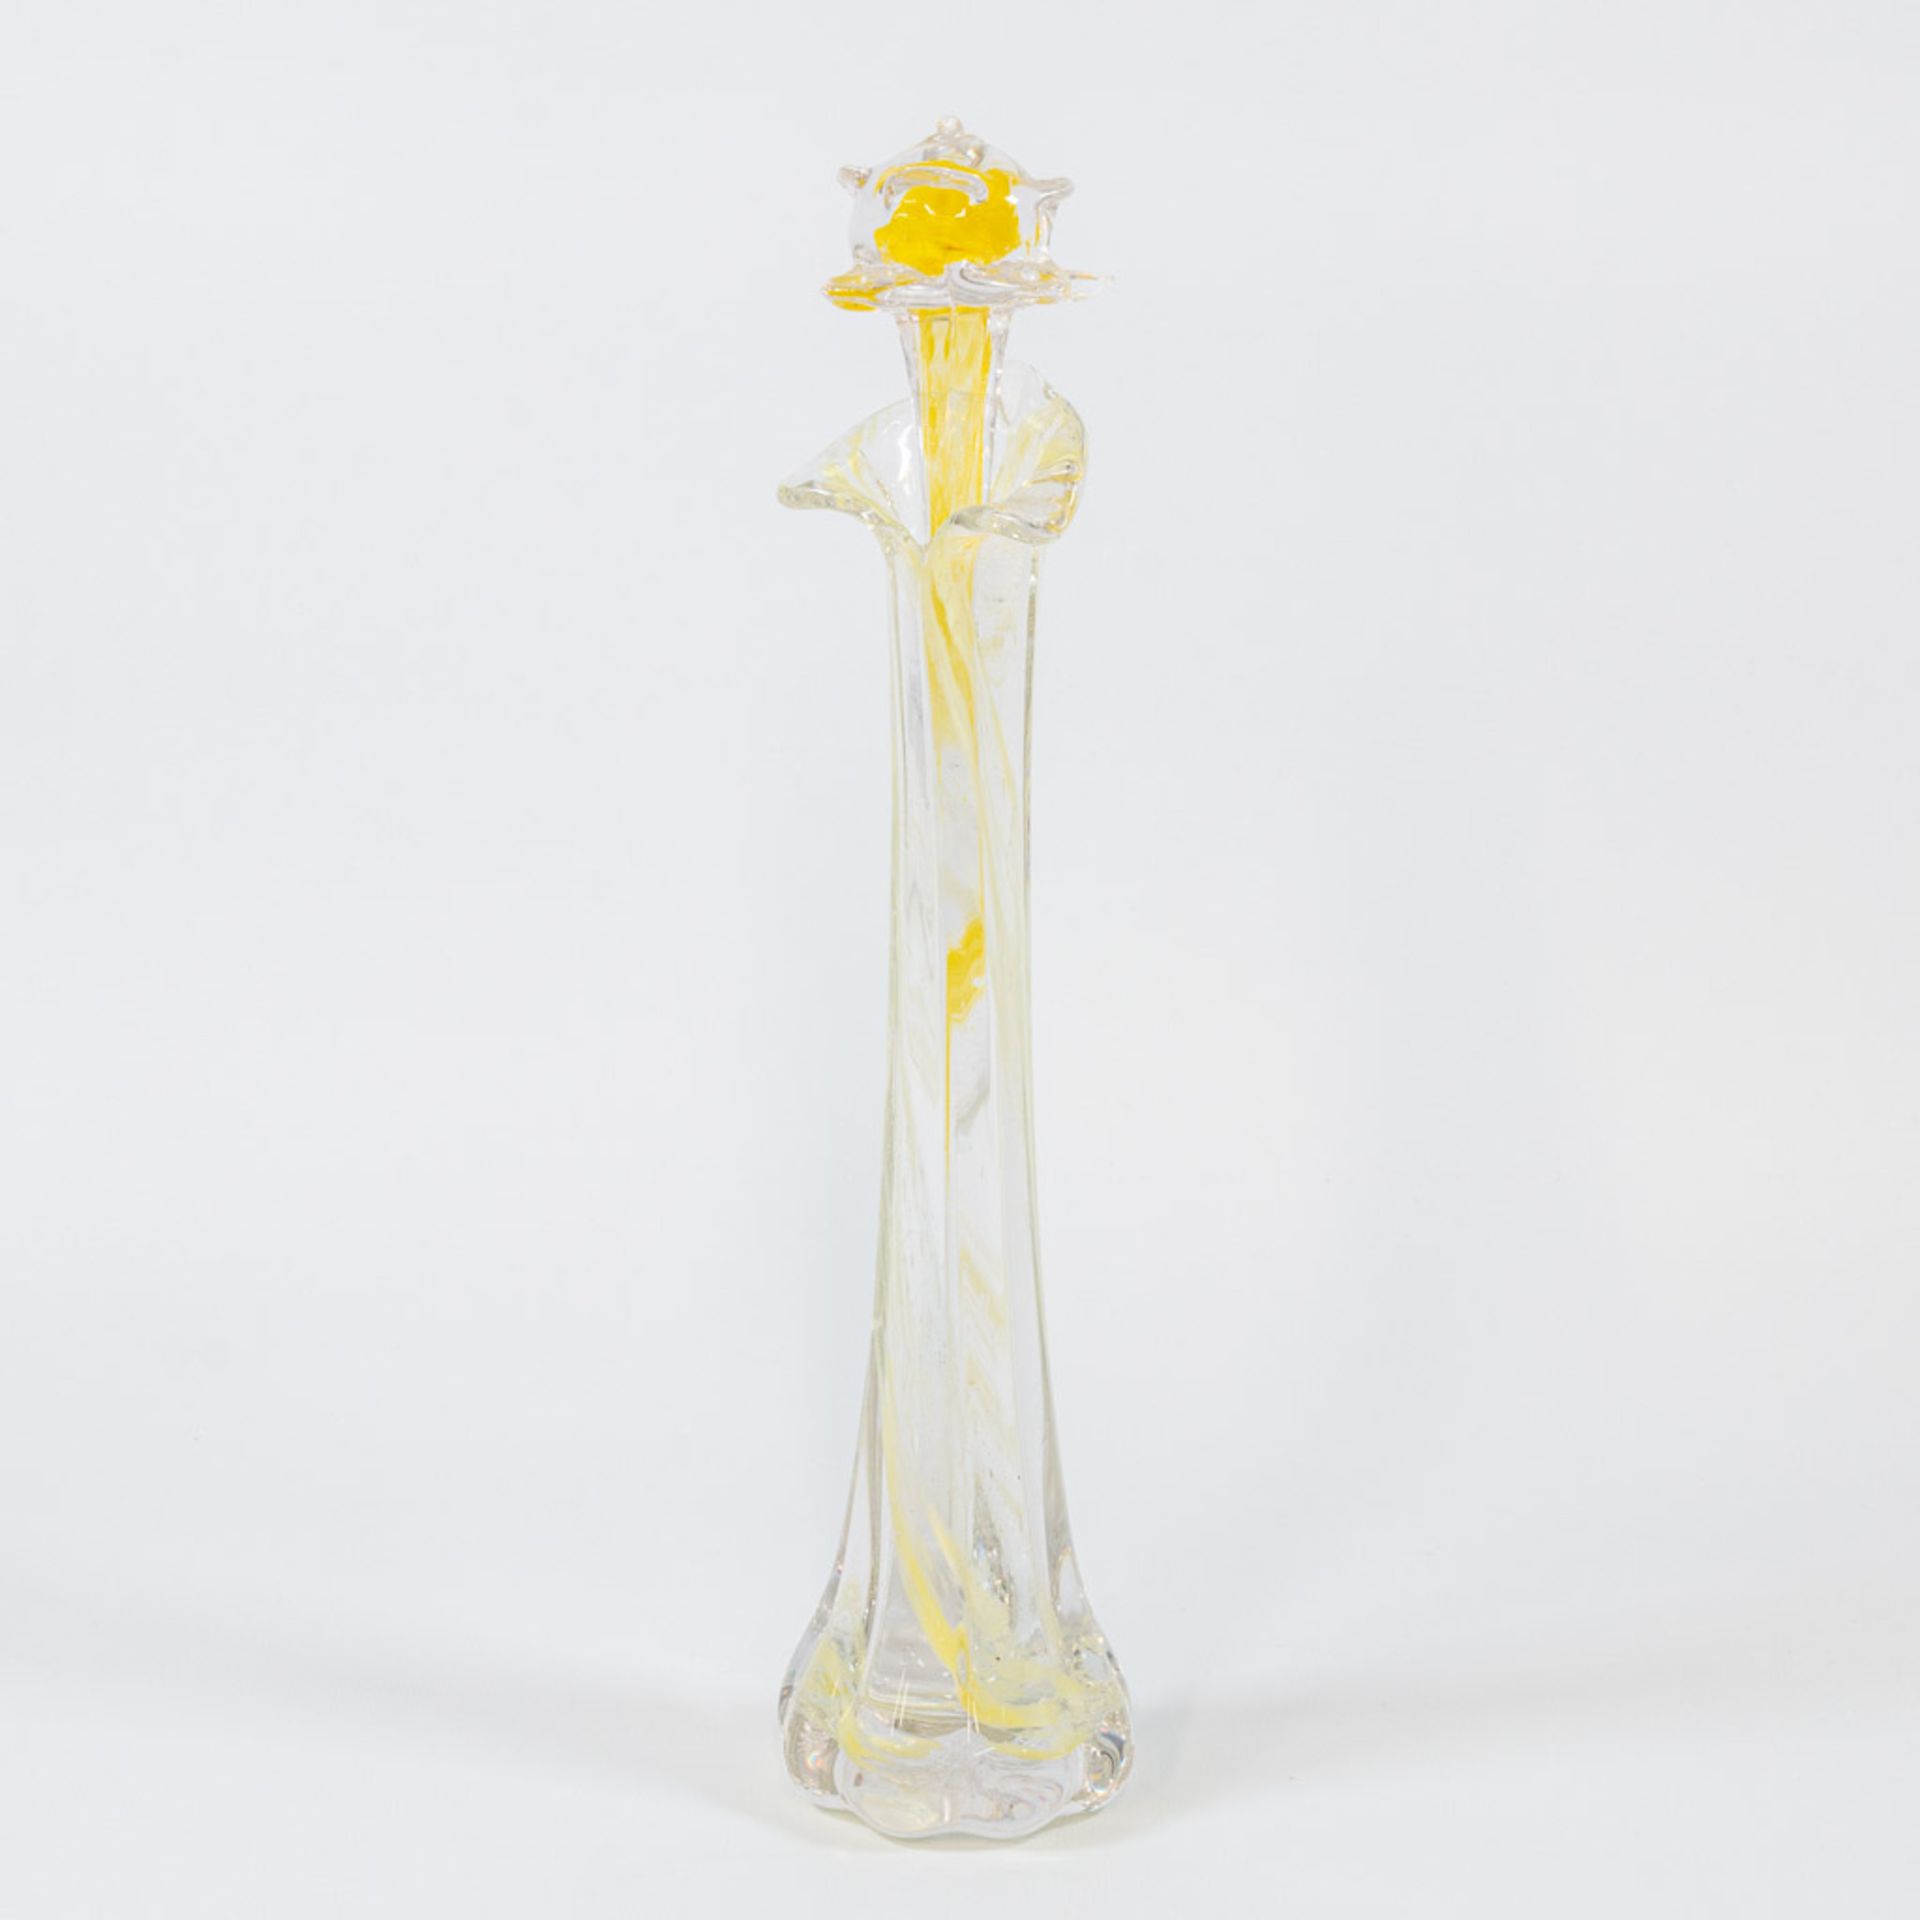 A collection of 4 vases and 4 glass flowers made in Murano, Italy. - Image 18 of 49